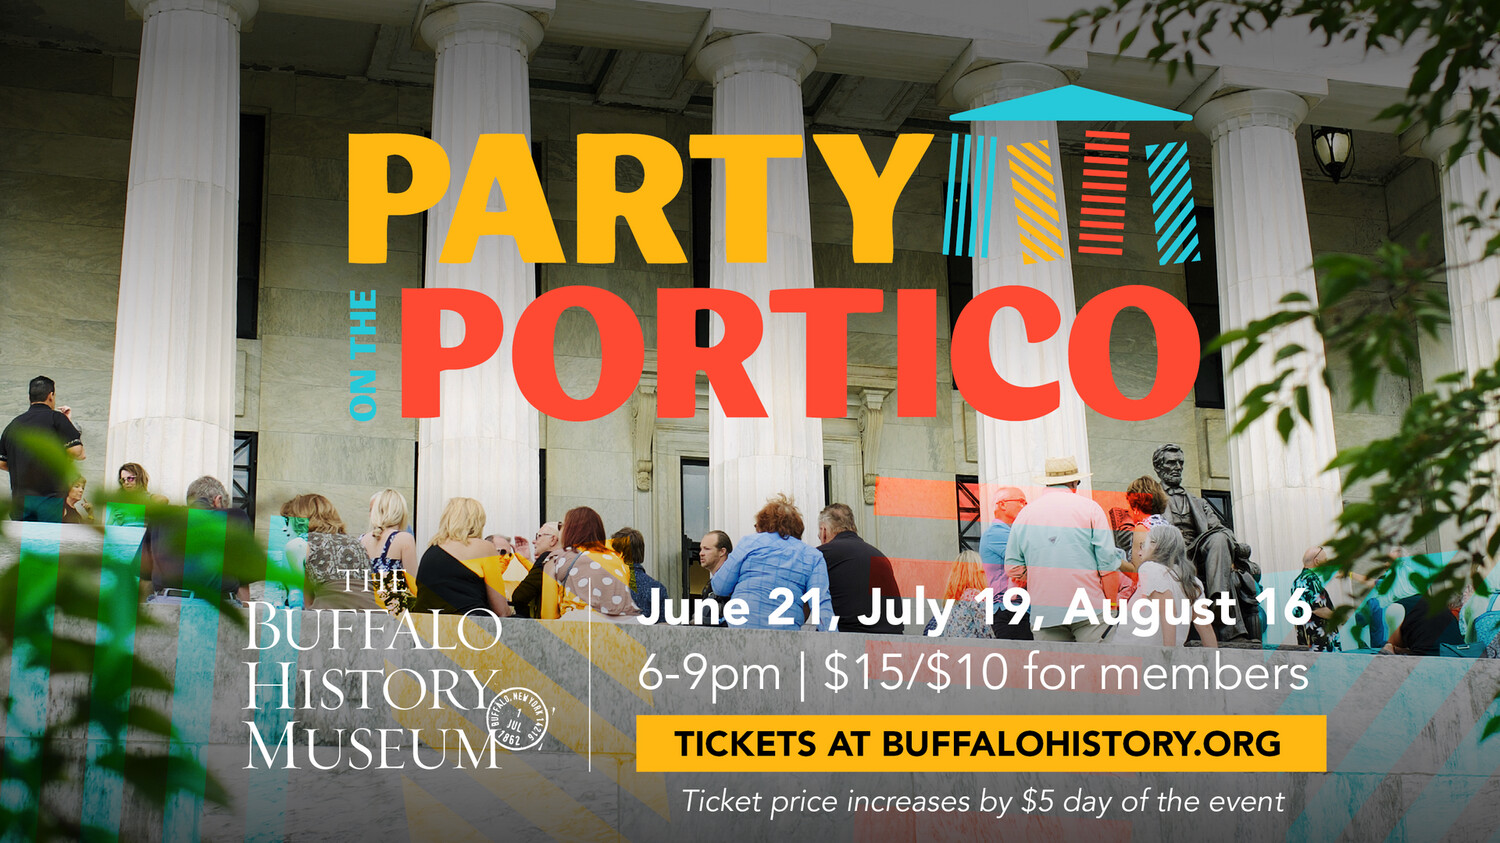 Individual Party on the Portico Tickets